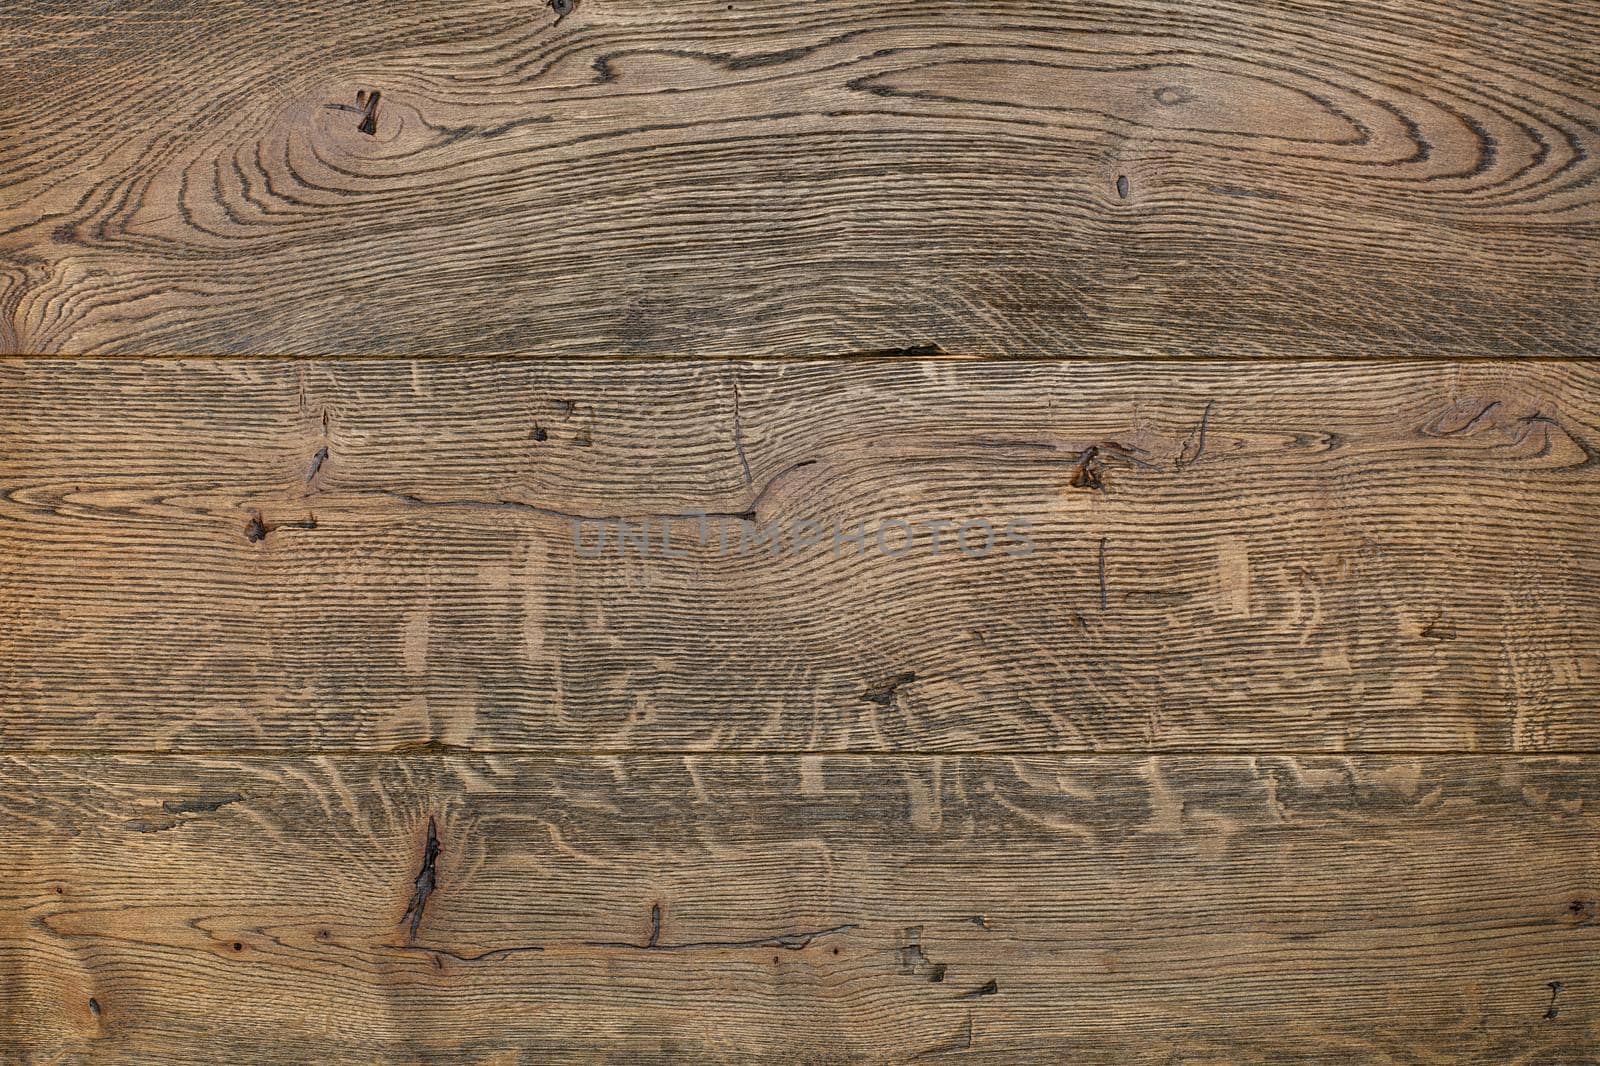 Old, cracked wooden background of horizontal planks and the dark brown texture of an old dark oak tree with cracks and knots.